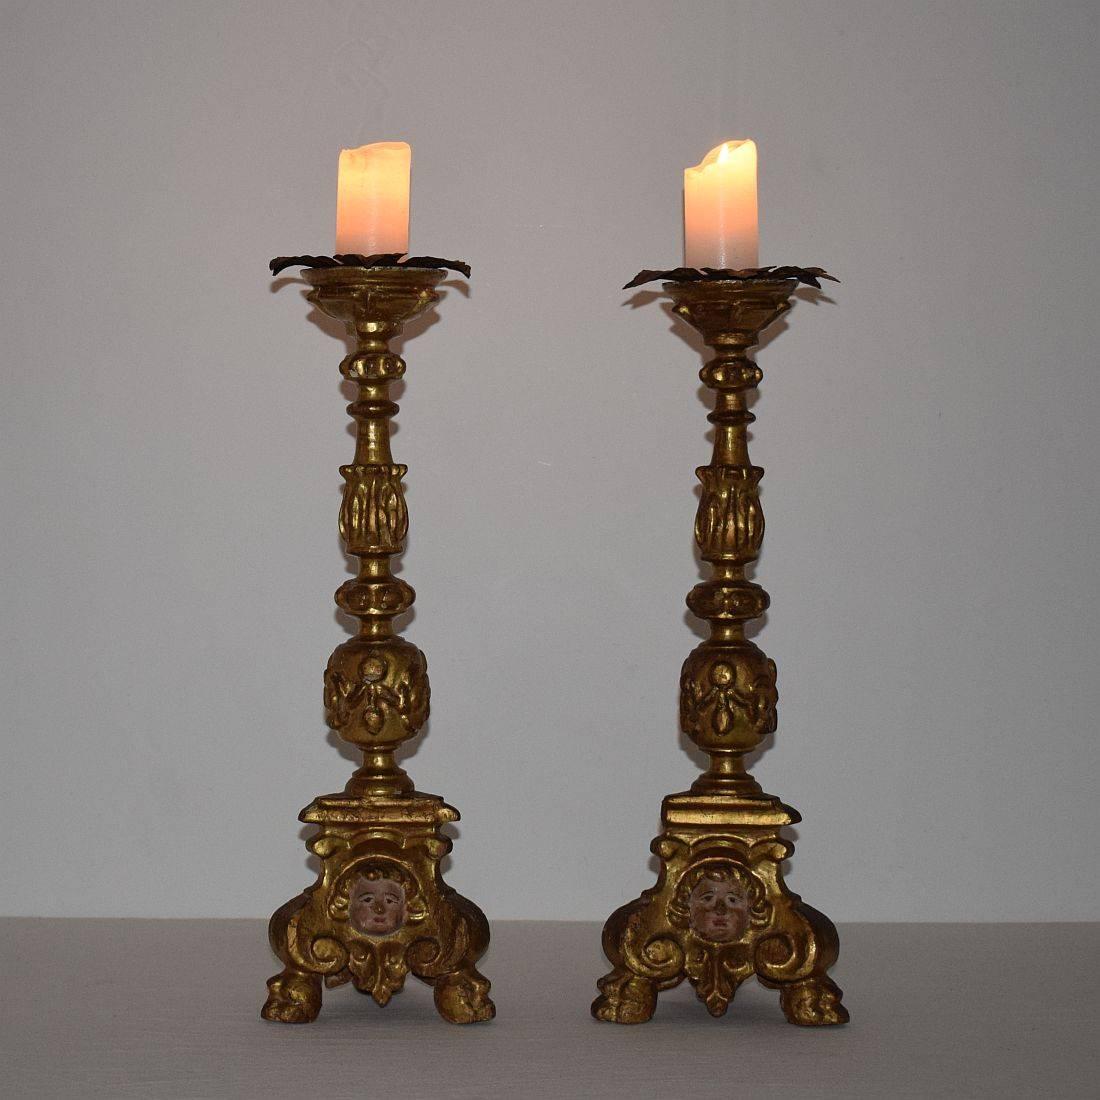 Beautiful pair of candleholders with angel heads
Italy, circa 1650-1700
Weathered, losses and old repairs. More pictures available on request.